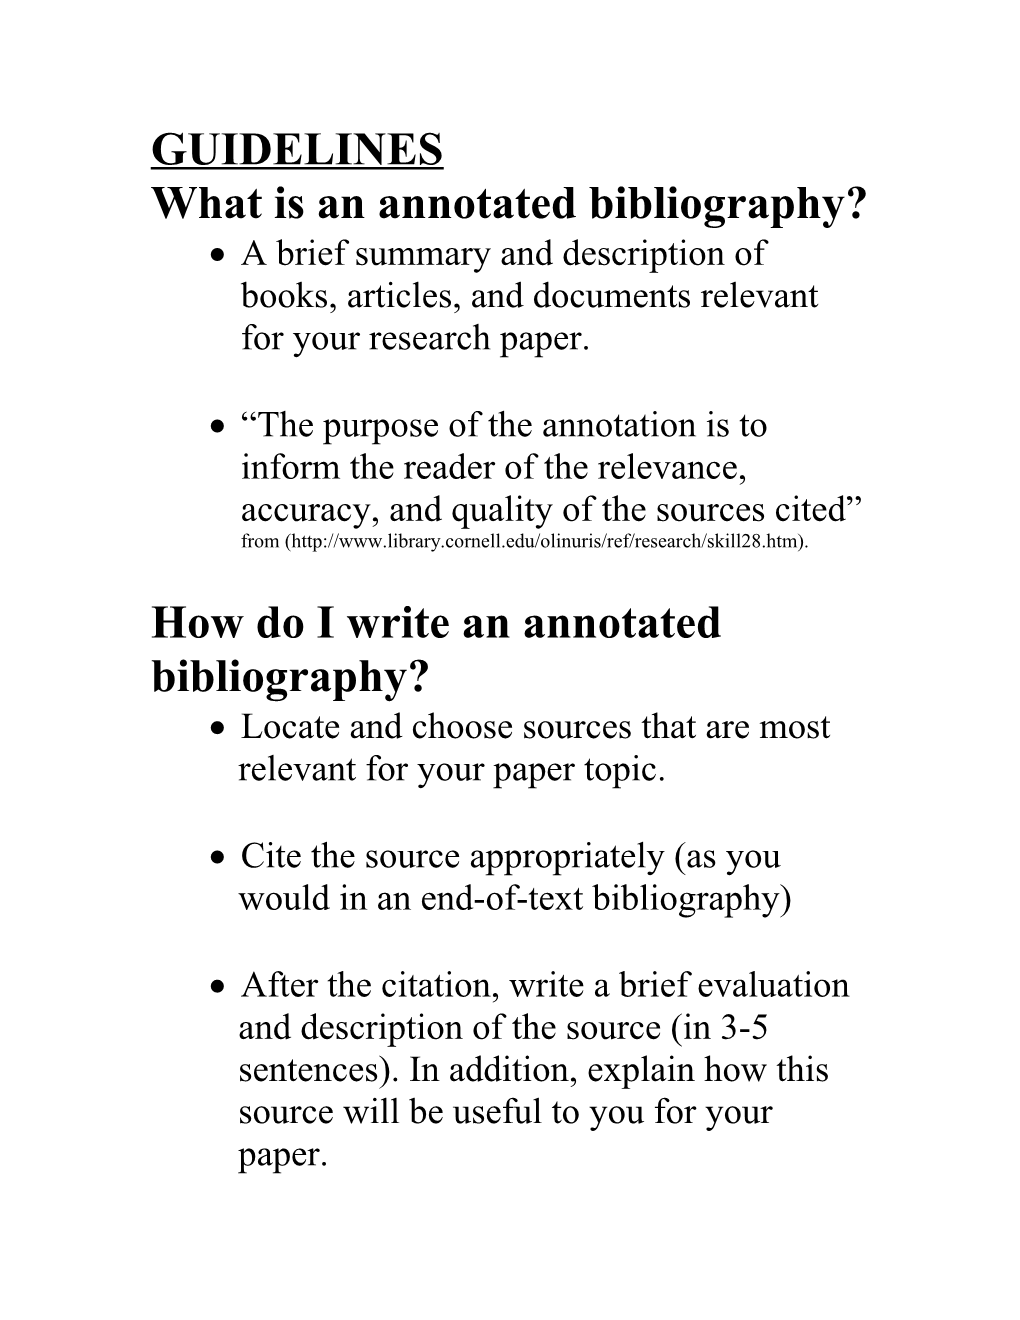 What Is an Annotated Bibliography s2